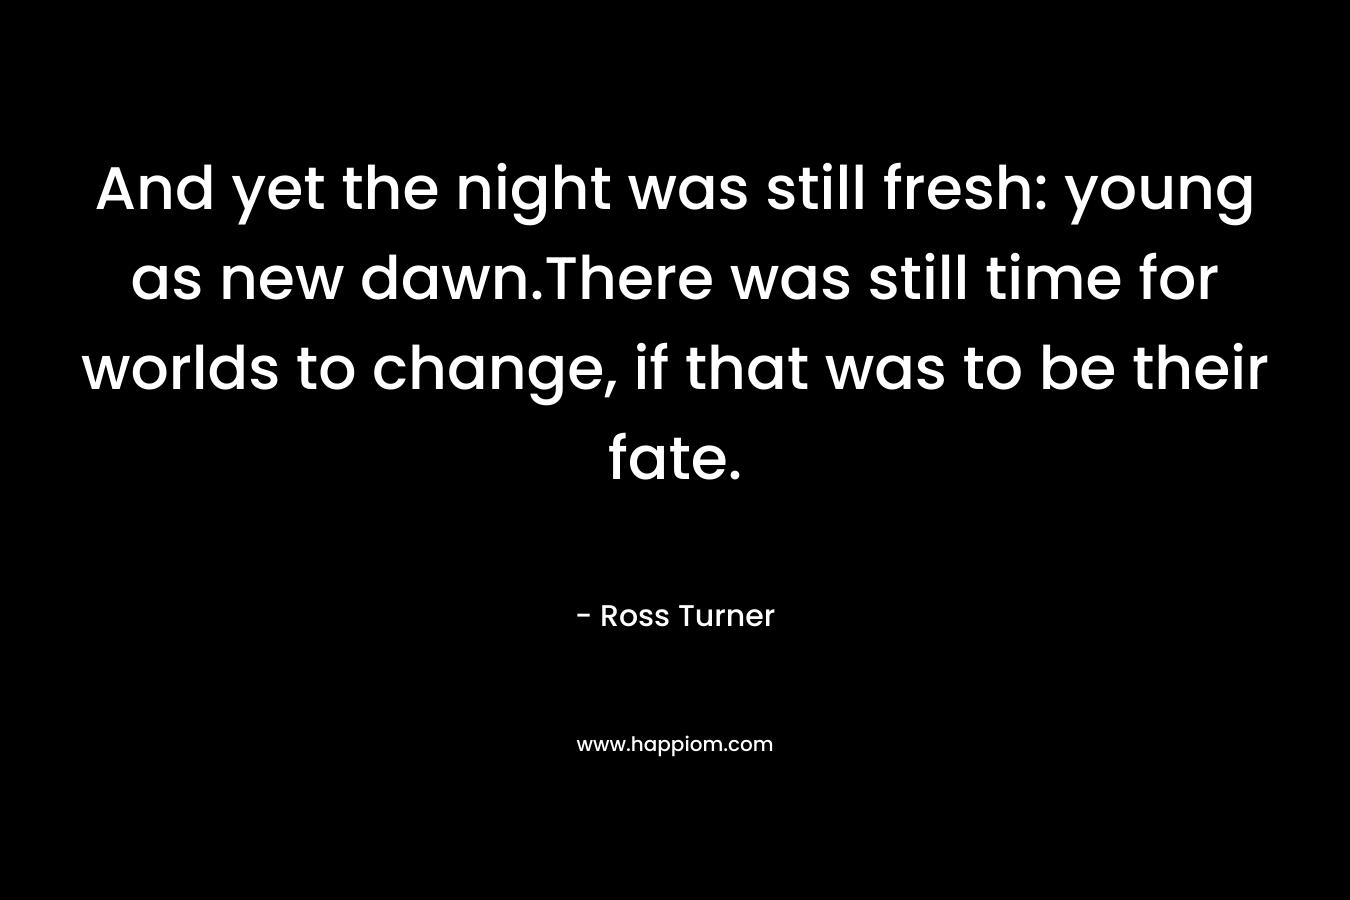 And yet the night was still fresh: young as new dawn.There was still time for worlds to change, if that was to be their fate.